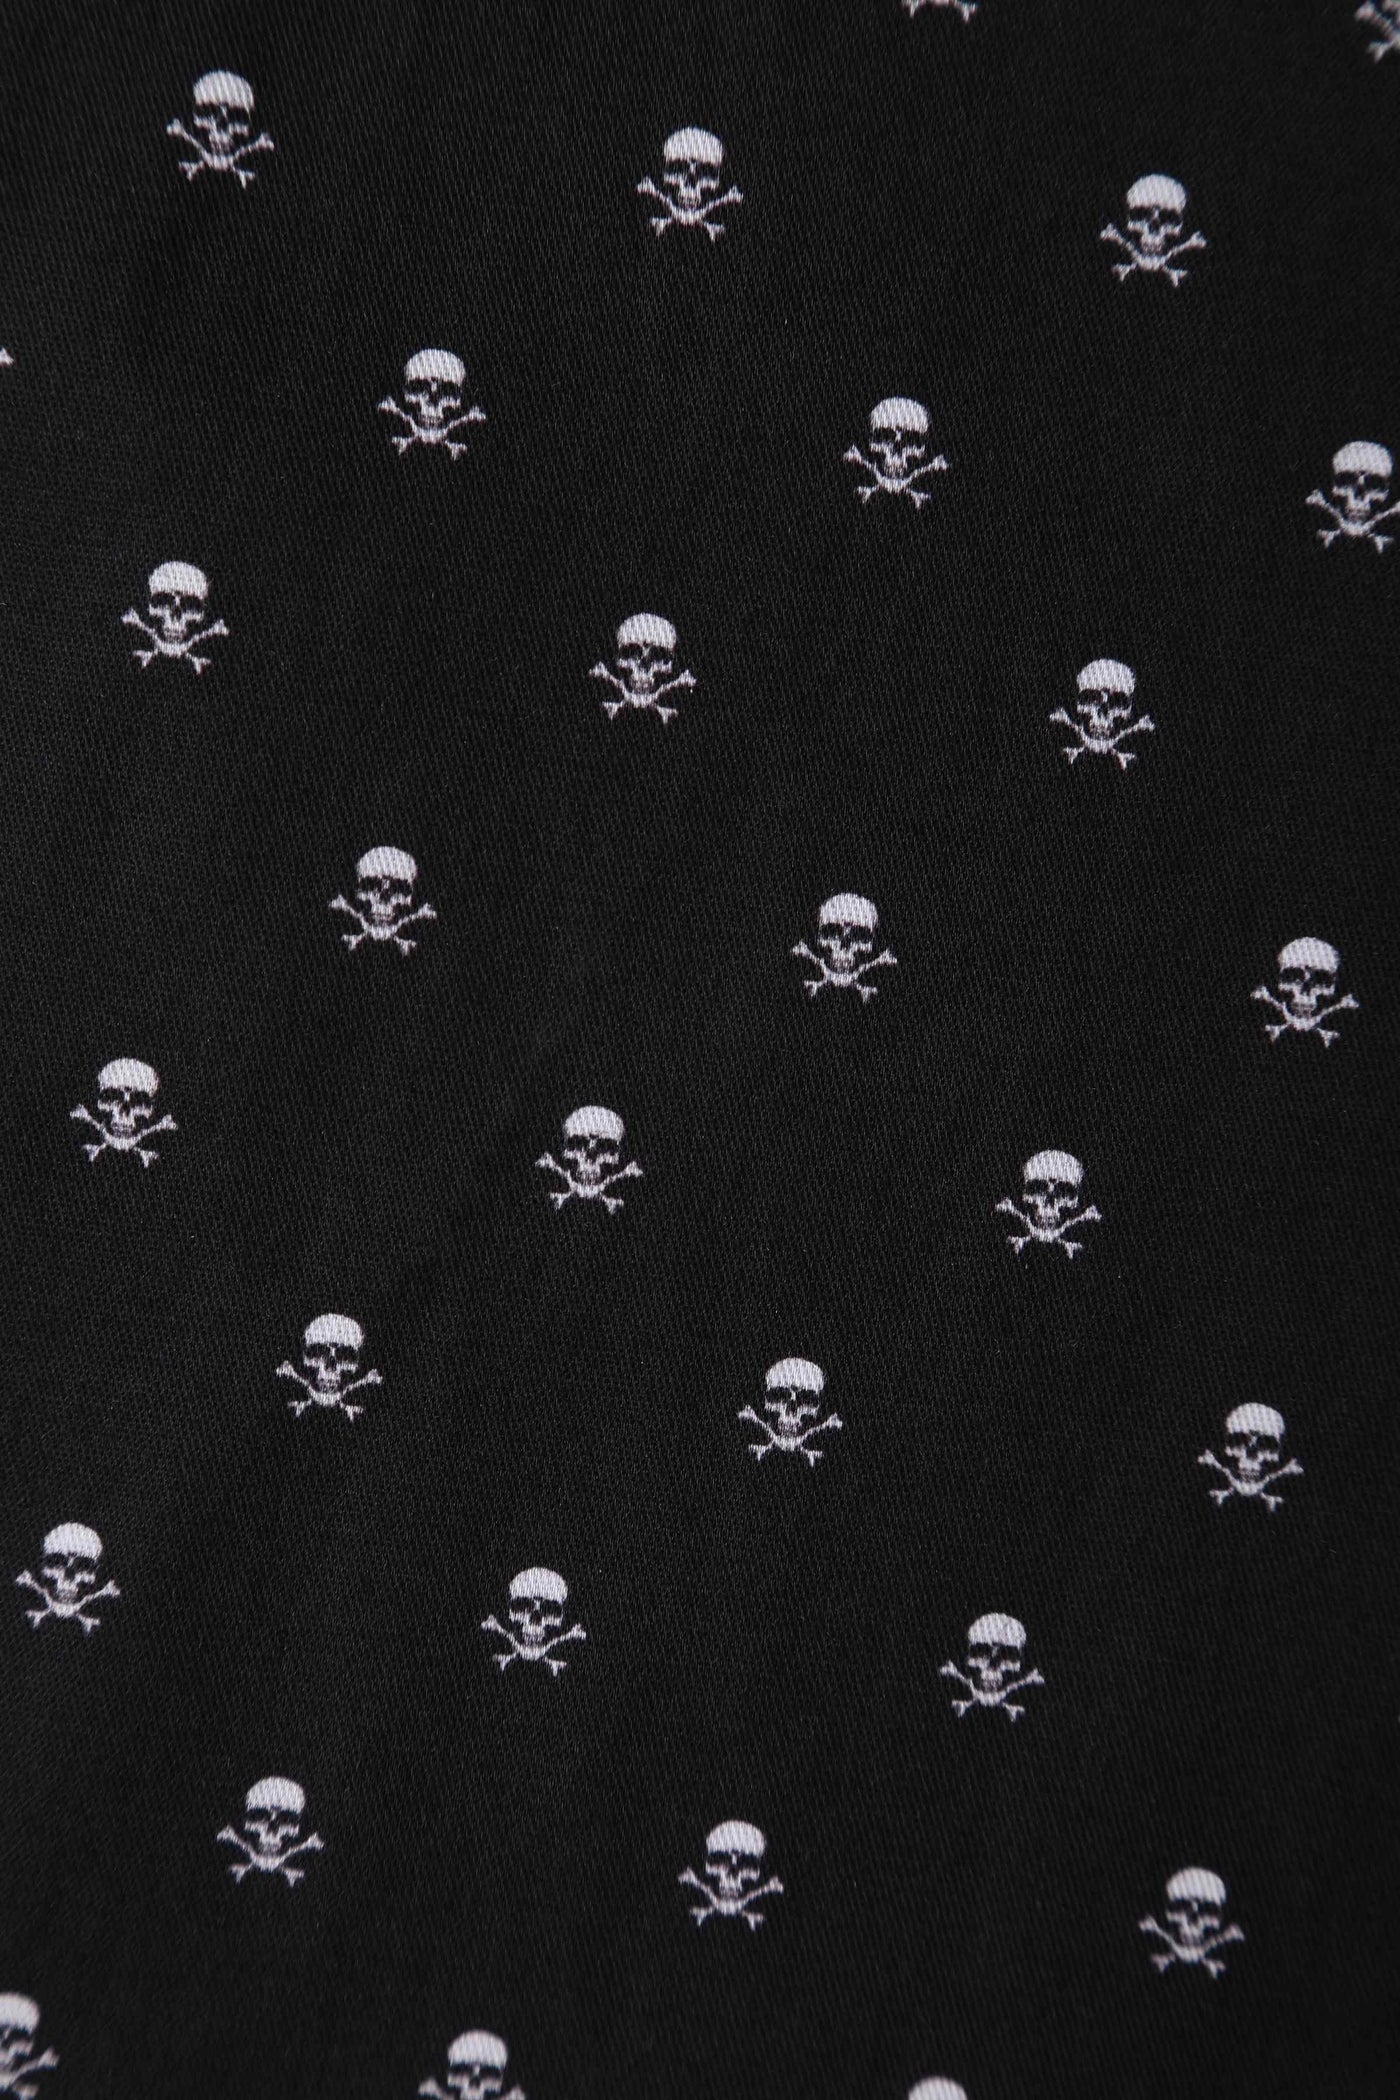 Close up fabric view of black skull print vintage style swing dress